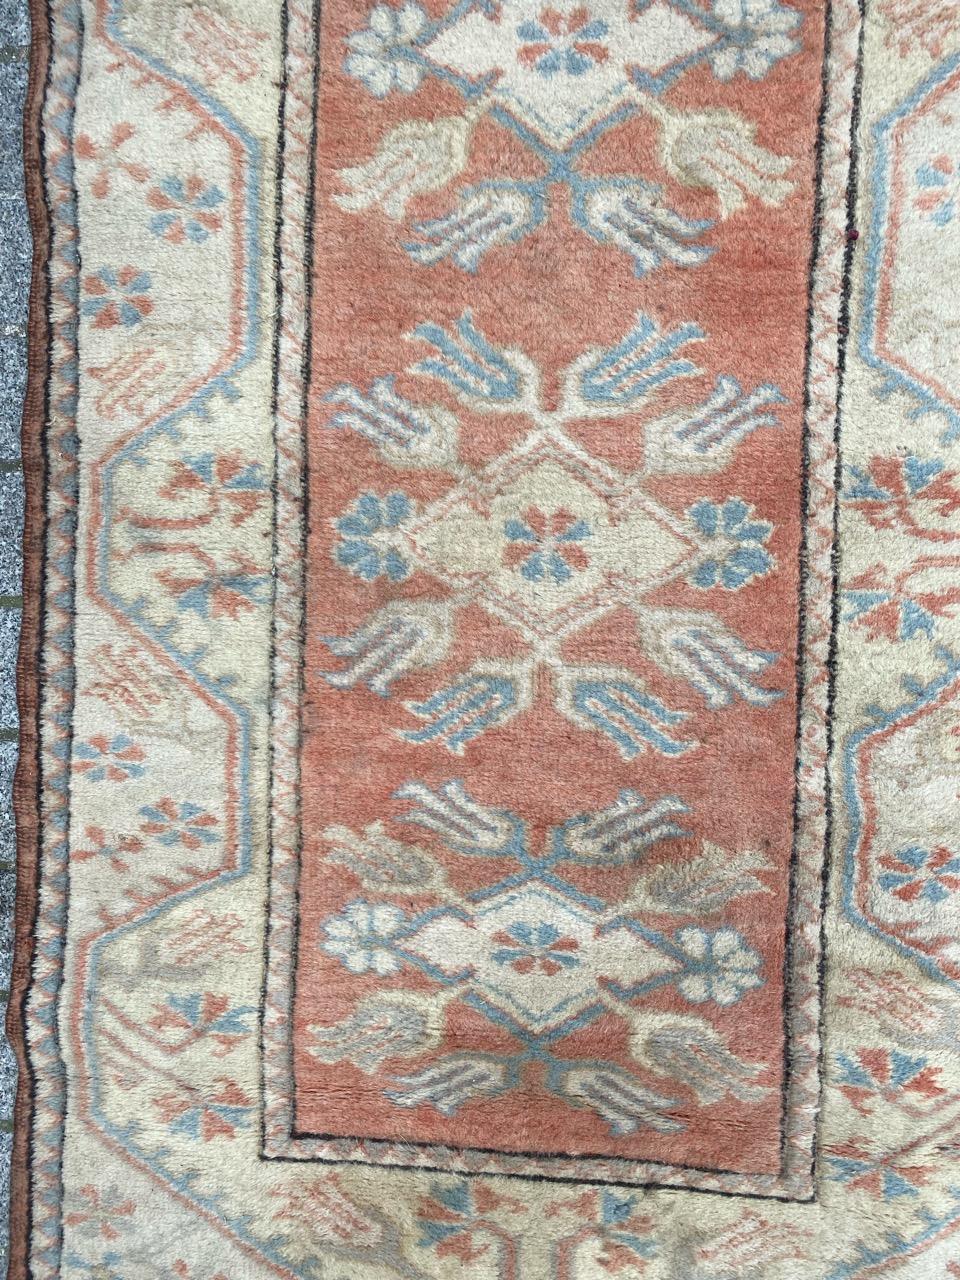 Beautiful small vintage Turkish rug from Kars, meticulously hand-knotted in wool on wool, featuring charming geometric designs. This rug showcases an intricate field pattern with three geometric star-shaped medallions in beige and subtle blue